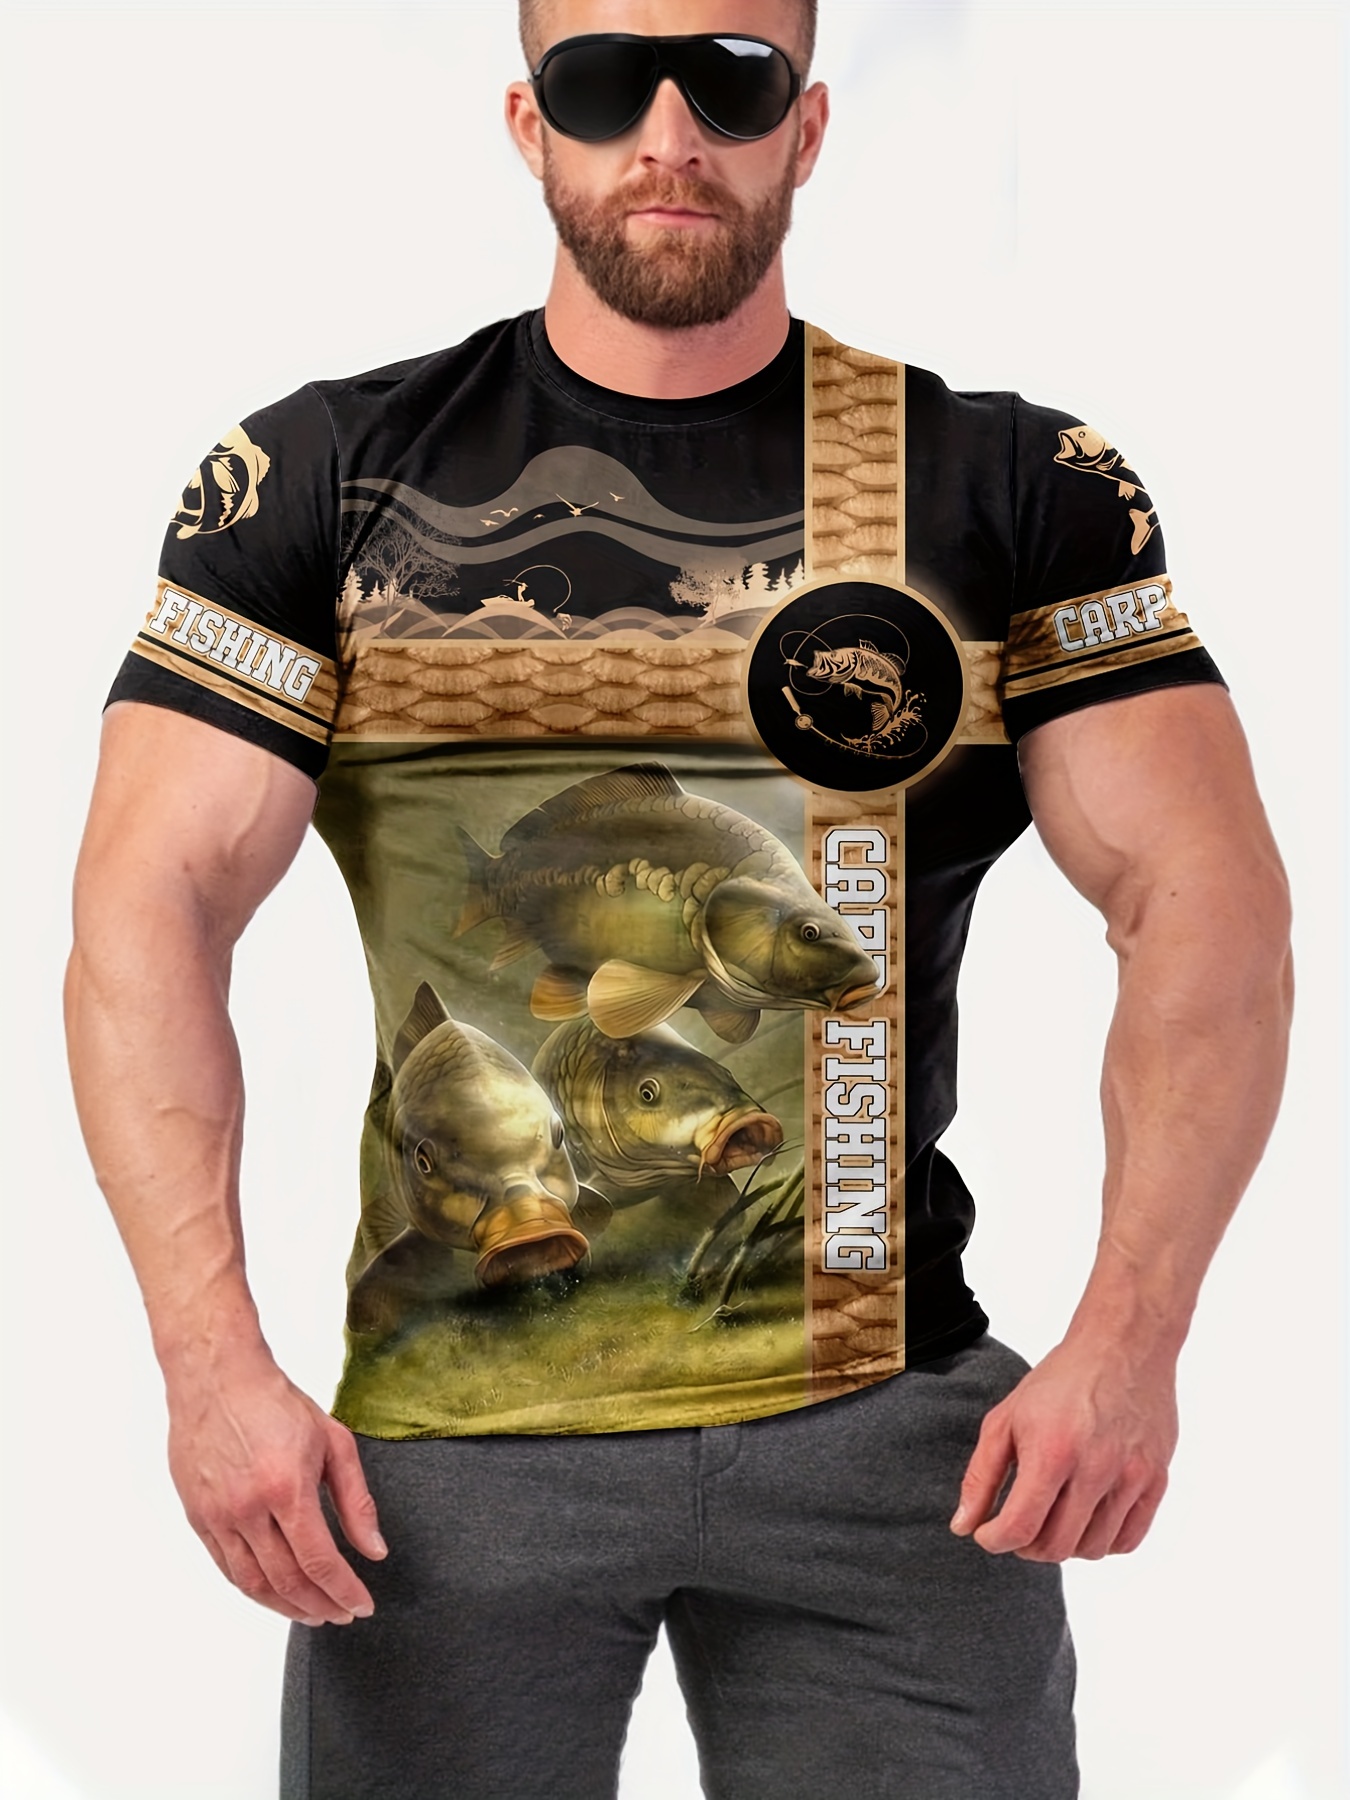 Catfish Fishing Camo Customize 3D Printed Mens t shirt Cool Summer Casual  style Unisex T-shirt gift for fisherman